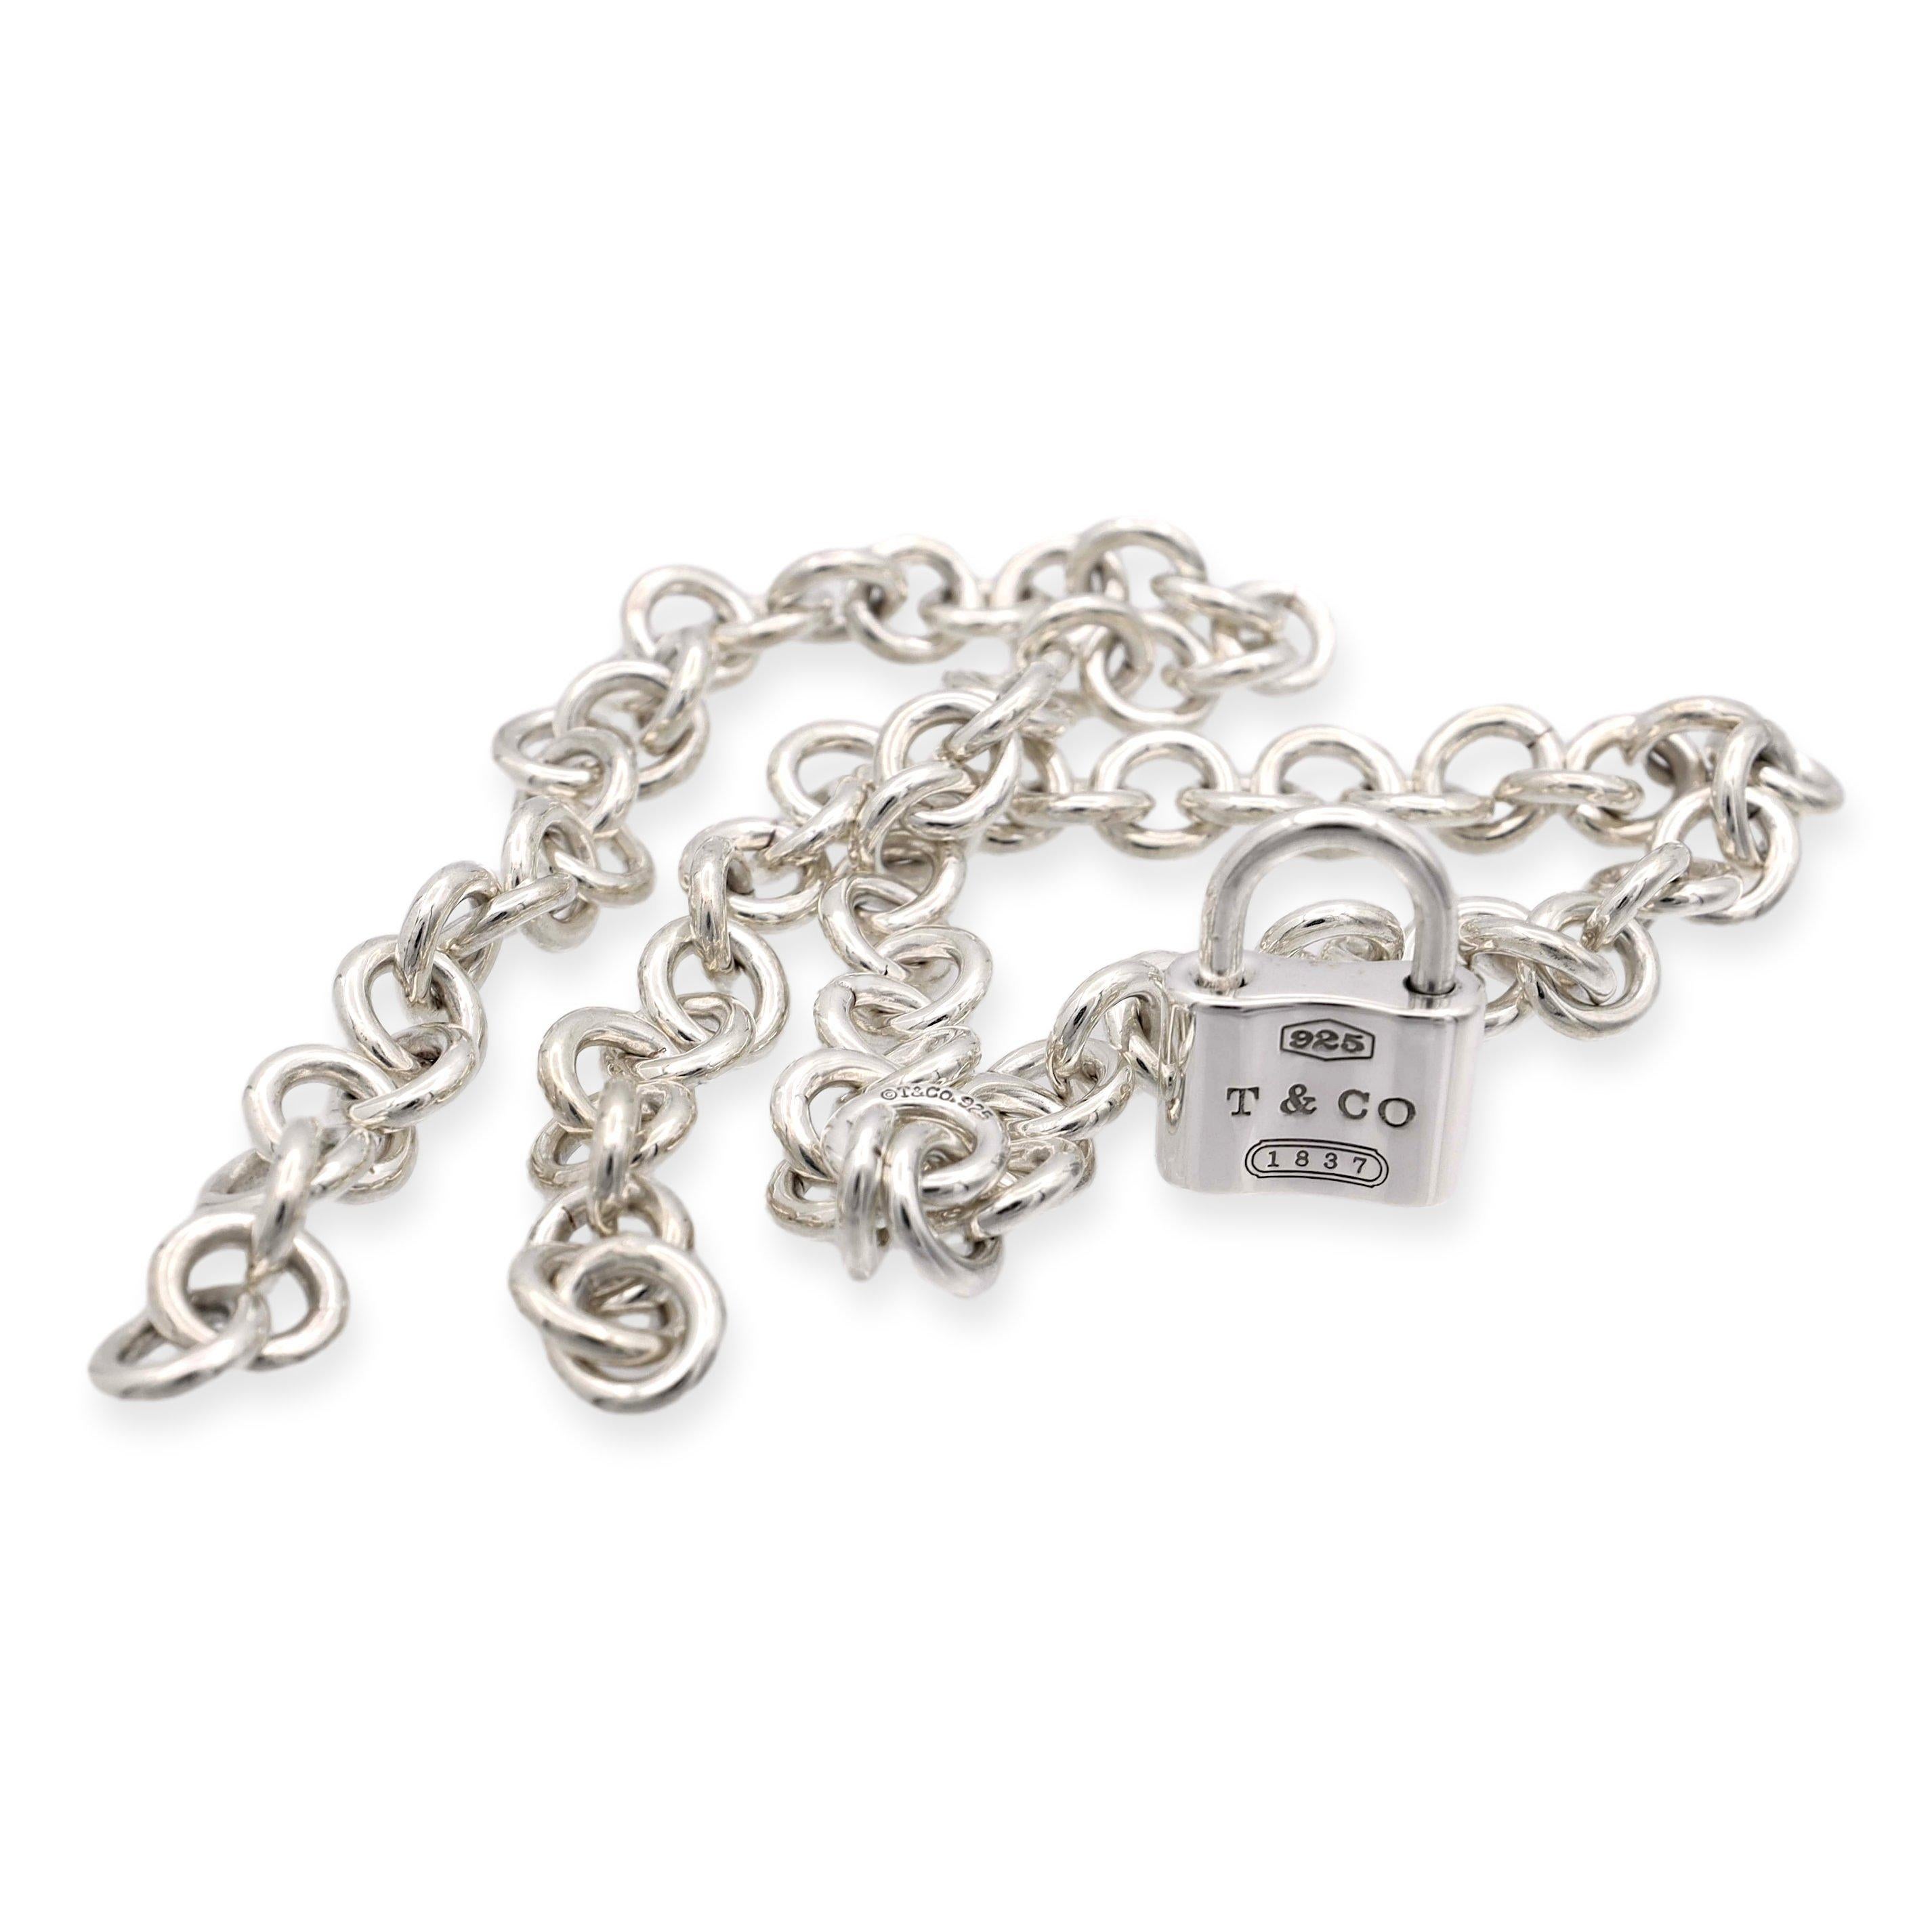 Tiffany & Co. large link choker necklace from the 1837 collection finely crafted in fine sterling silver featuring a large padlock charm pendant hanging off a 16